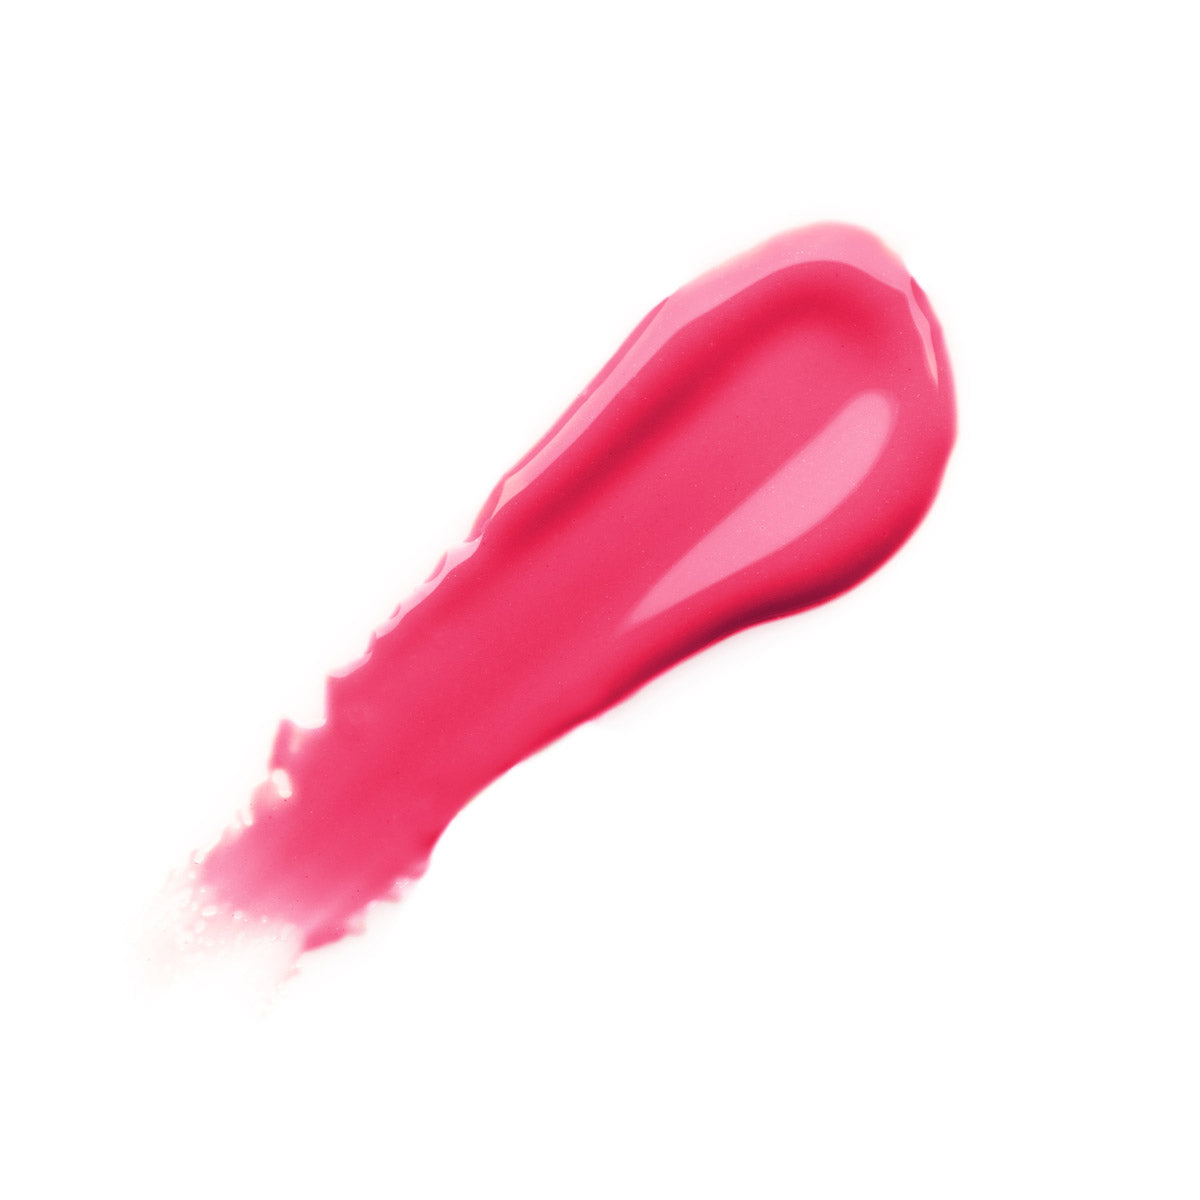 POMPADOUR PINK - BRIGHT PINK - high shine lip gloss in bright pink shade